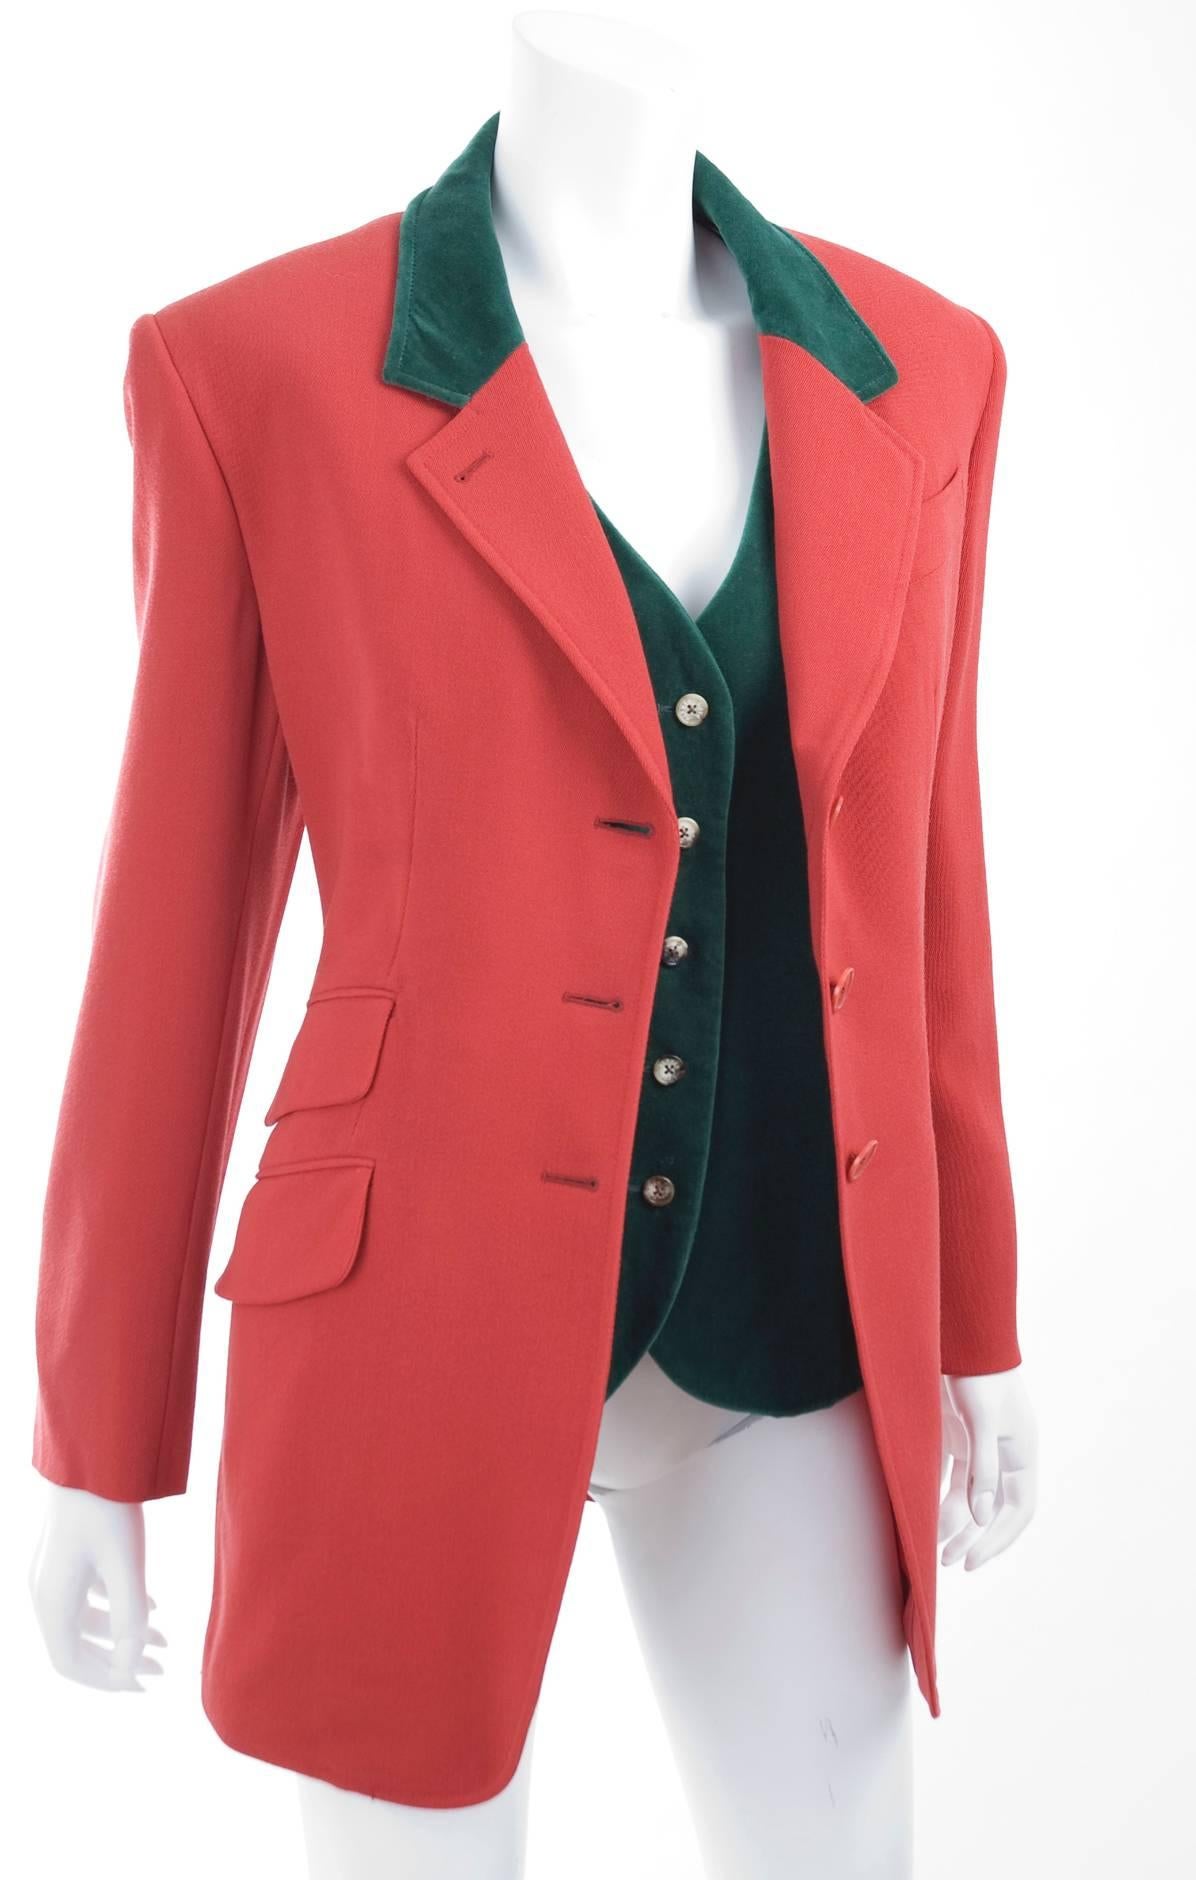 Women's Vintage 80s Hermes Riding Style Jacket and Vest in Red and Green For Sale